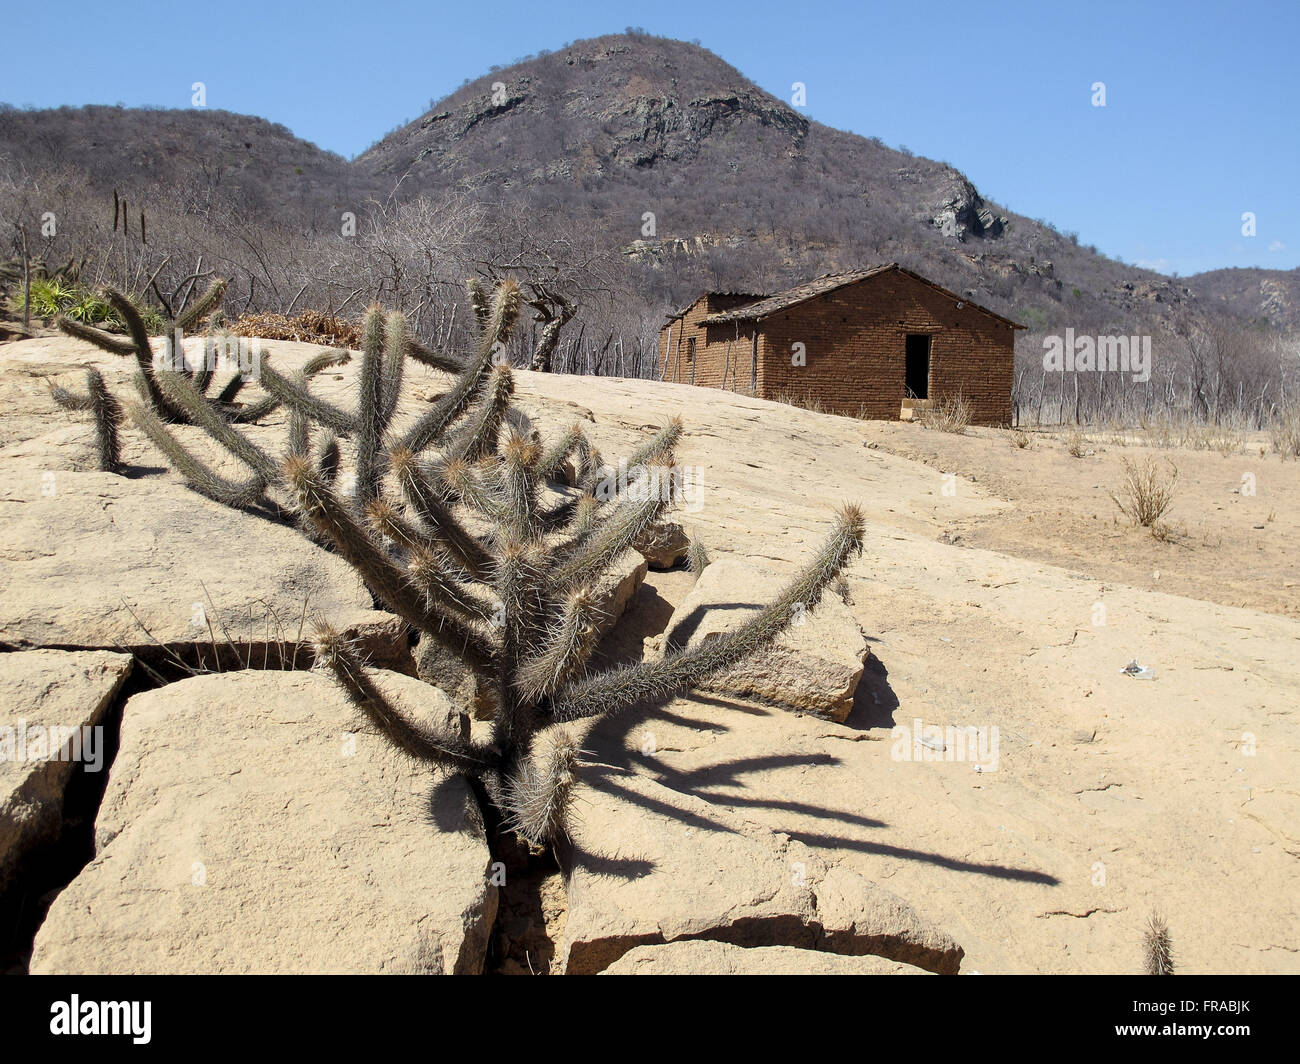 Cacti growing near the house straightforward in arid landscape in the countryside Stock Photo